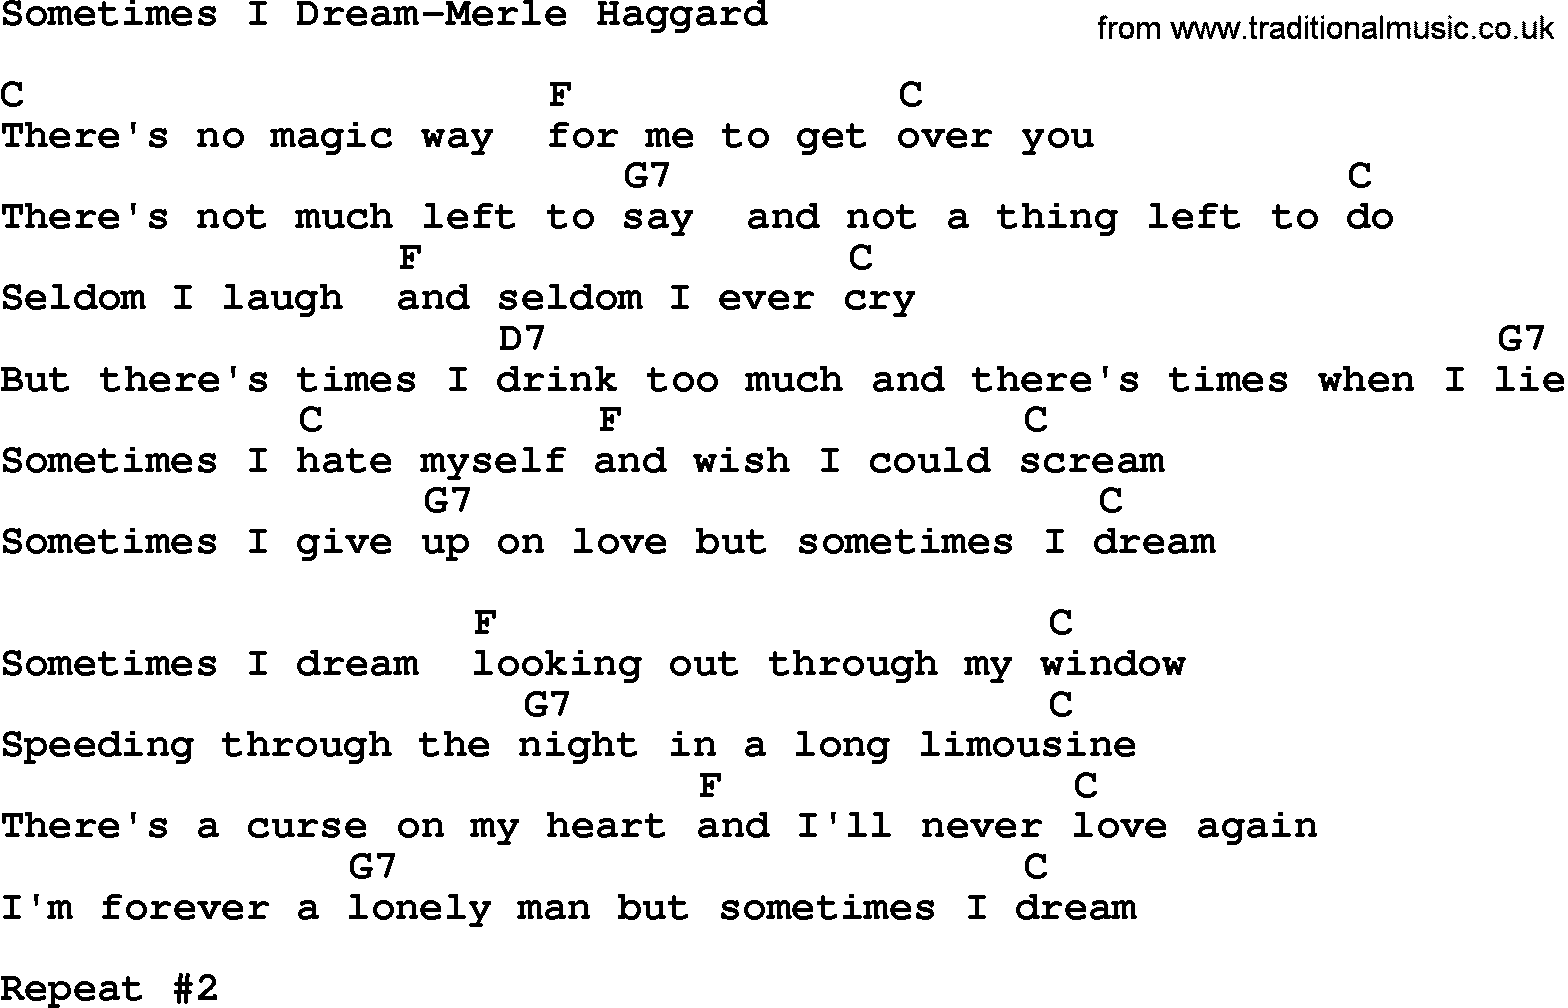 Country music song: Sometimes I Dream-Merle Haggard lyrics and chords